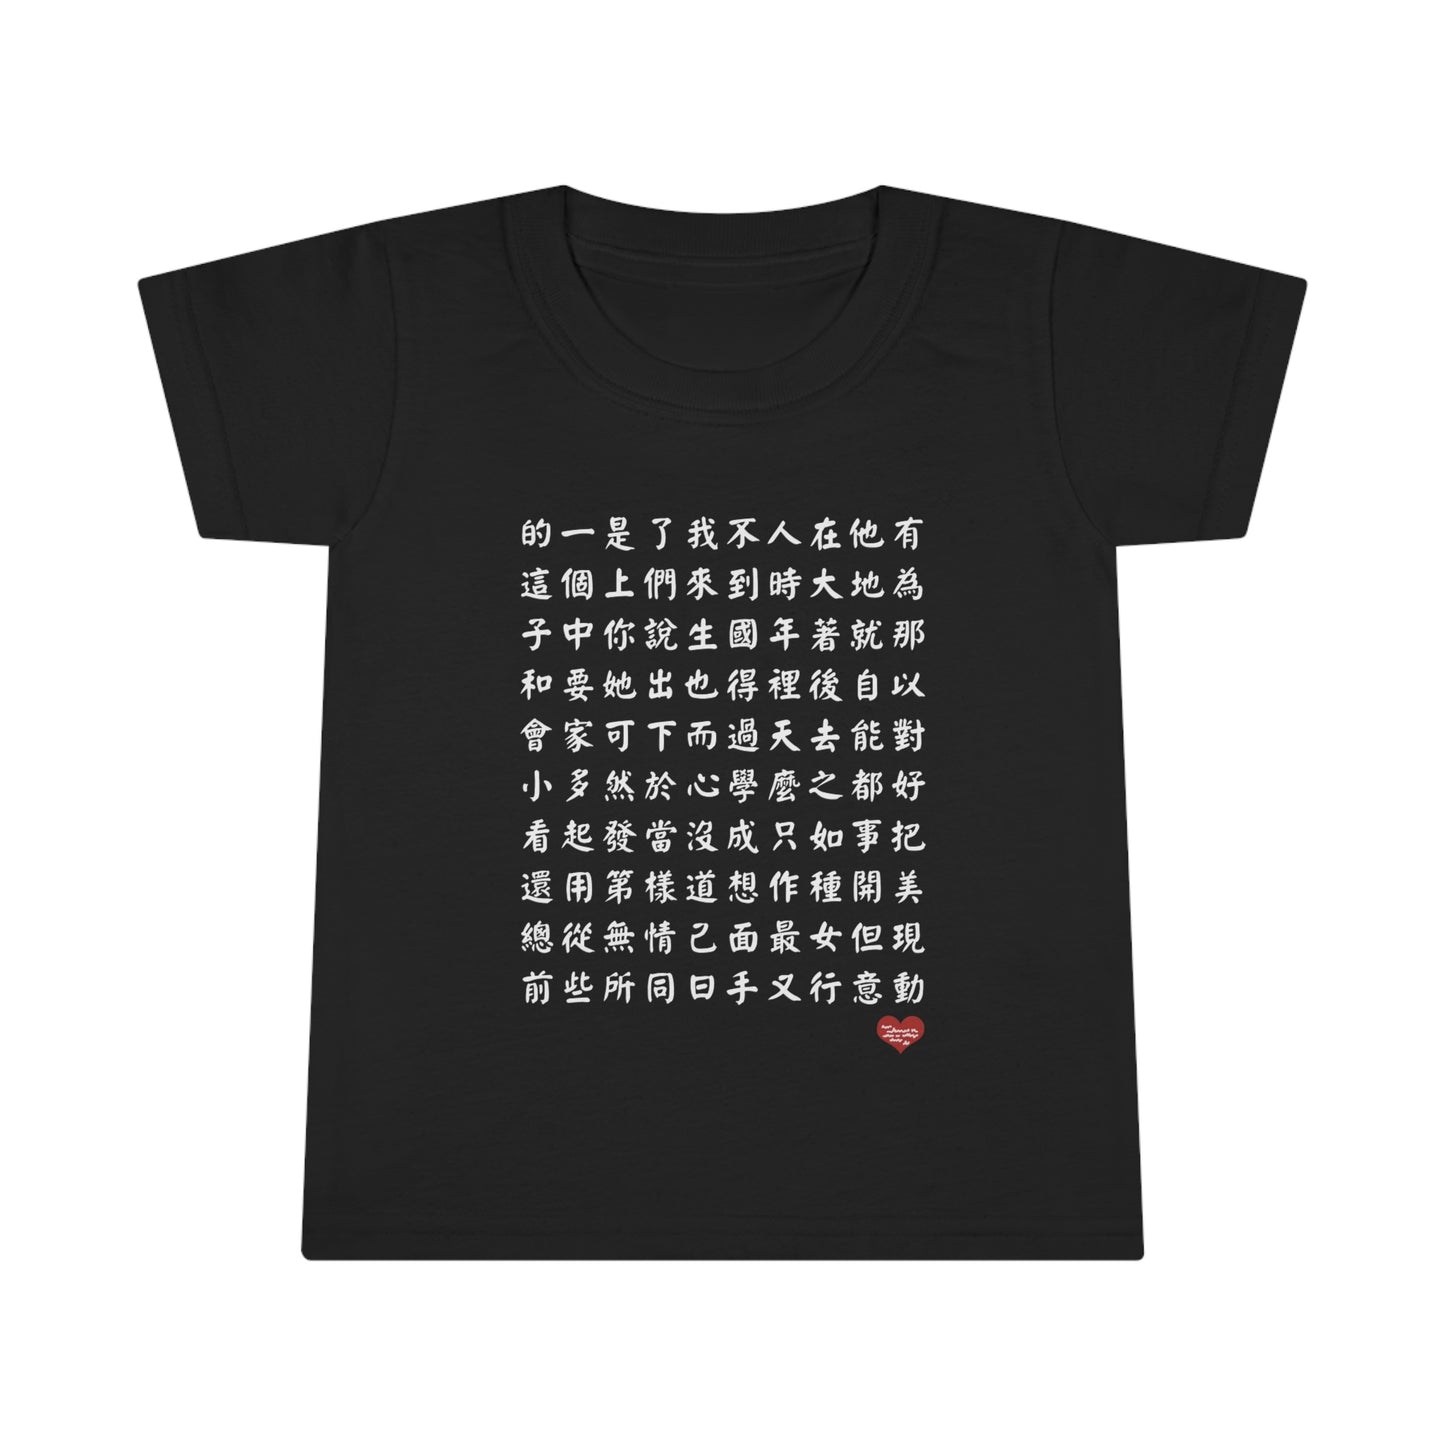 Toddler 1000 Characters Set 1,  1000漢字系列 #1 Color Block T-shirts